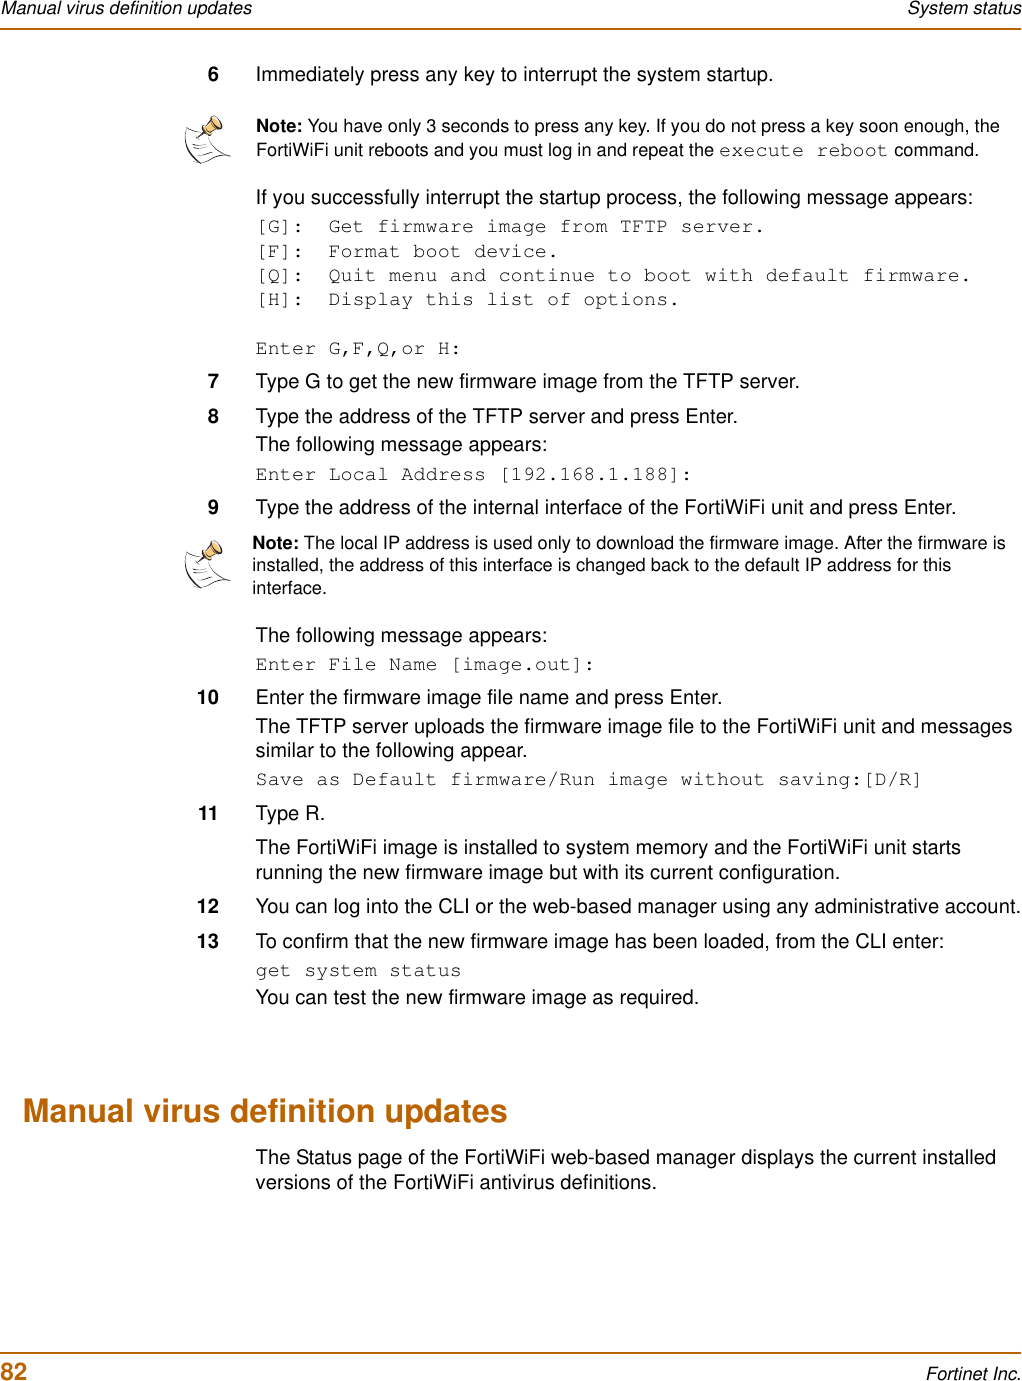 82 Fortinet Inc.Manual virus definition updates System status6Immediately press any key to interrupt the system startup.If you successfully interrupt the startup process, the following message appears:[G]:  Get firmware image from TFTP server.[F]:  Format boot device.[Q]:  Quit menu and continue to boot with default firmware.[H]:  Display this list of options.Enter G,F,Q,or H:7Type G to get the new firmware image from the TFTP server.8Type the address of the TFTP server and press Enter.The following message appears:Enter Local Address [192.168.1.188]:9Type the address of the internal interface of the FortiWiFi unit and press Enter.The following message appears:Enter File Name [image.out]:10 Enter the firmware image file name and press Enter.The TFTP server uploads the firmware image file to the FortiWiFi unit and messages similar to the following appear.Save as Default firmware/Run image without saving:[D/R]11 Type R.The FortiWiFi image is installed to system memory and the FortiWiFi unit starts running the new firmware image but with its current configuration. 12 You can log into the CLI or the web-based manager using any administrative account.13 To confirm that the new firmware image has been loaded, from the CLI enter:get system statusYou can test the new firmware image as required.Manual virus definition updatesThe Status page of the FortiWiFi web-based manager displays the current installed versions of the FortiWiFi antivirus definitions.Note: You have only 3 seconds to press any key. If you do not press a key soon enough, the FortiWiFi unit reboots and you must log in and repeat the execute reboot command.Note: The local IP address is used only to download the firmware image. After the firmware is installed, the address of this interface is changed back to the default IP address for this interface.